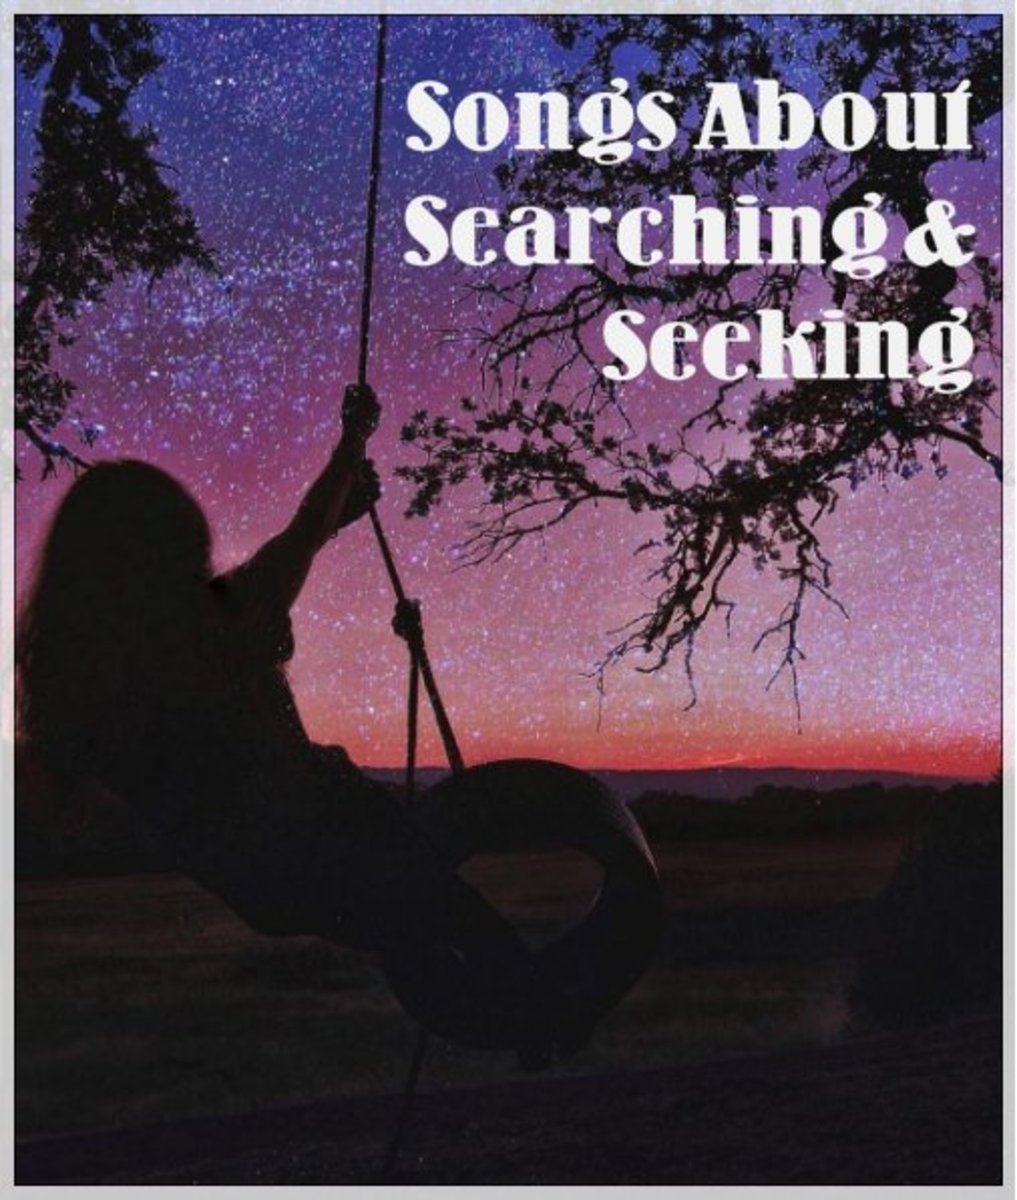 Whatever you're looking for in life, whether it's love, success, truth, or something else, make a list of pop, rock, country, and R&B songs about searching and seeking.